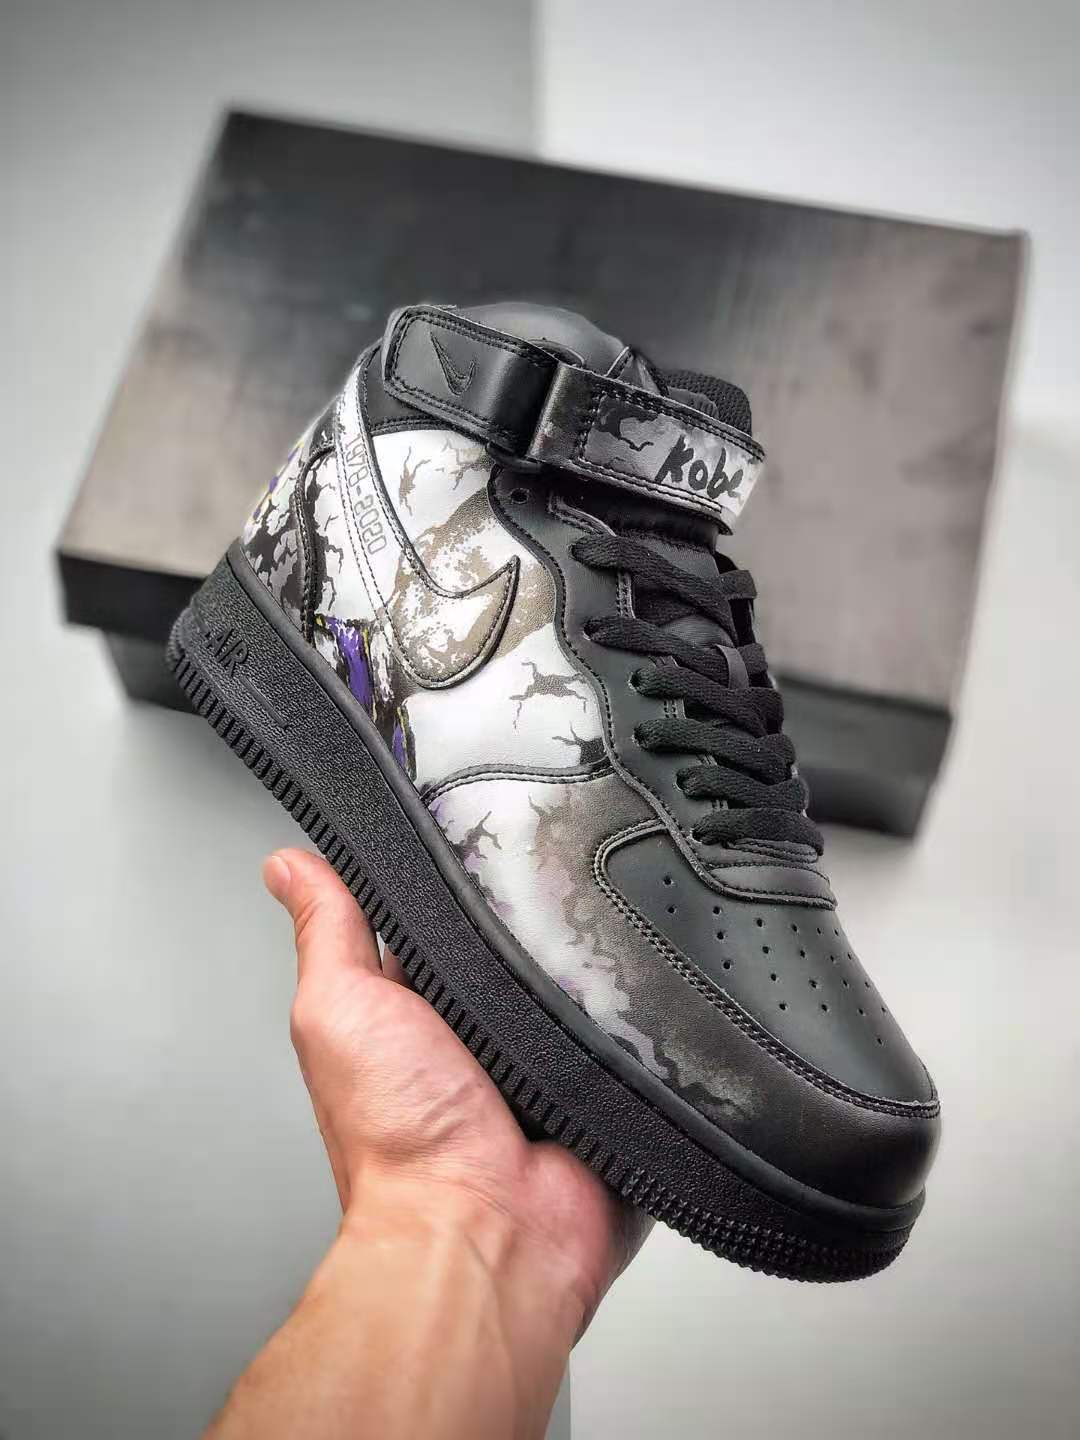 Nike Air Force 1 High 'Kobe' AQ8021-002 - Premium Sneakers for Basketball Enthusiasts!